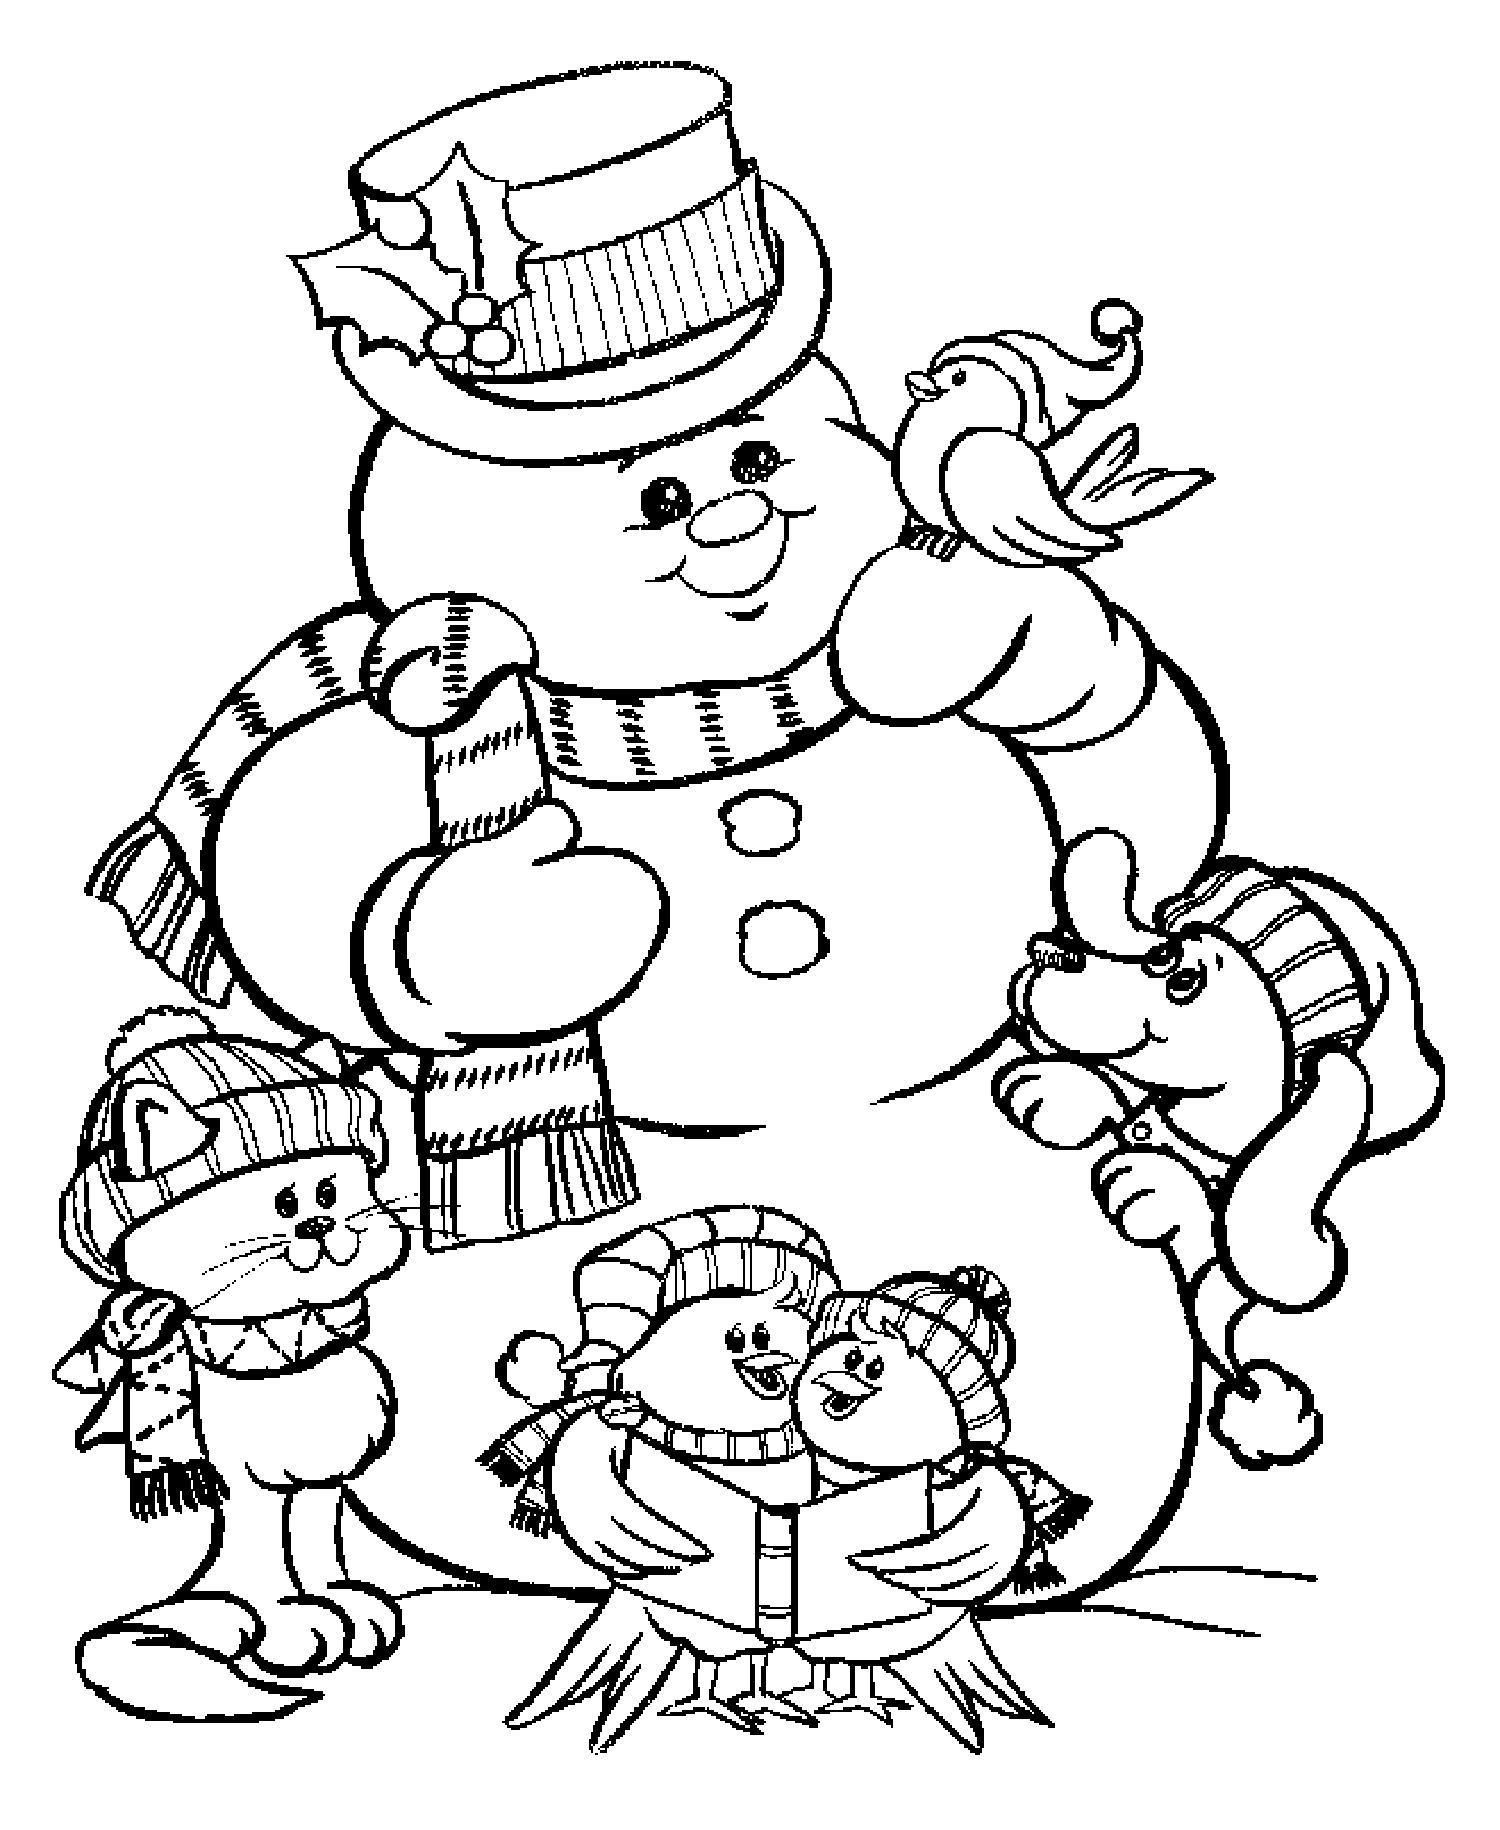 Snowman Christmas Coloring Pages For Kids To Print Color